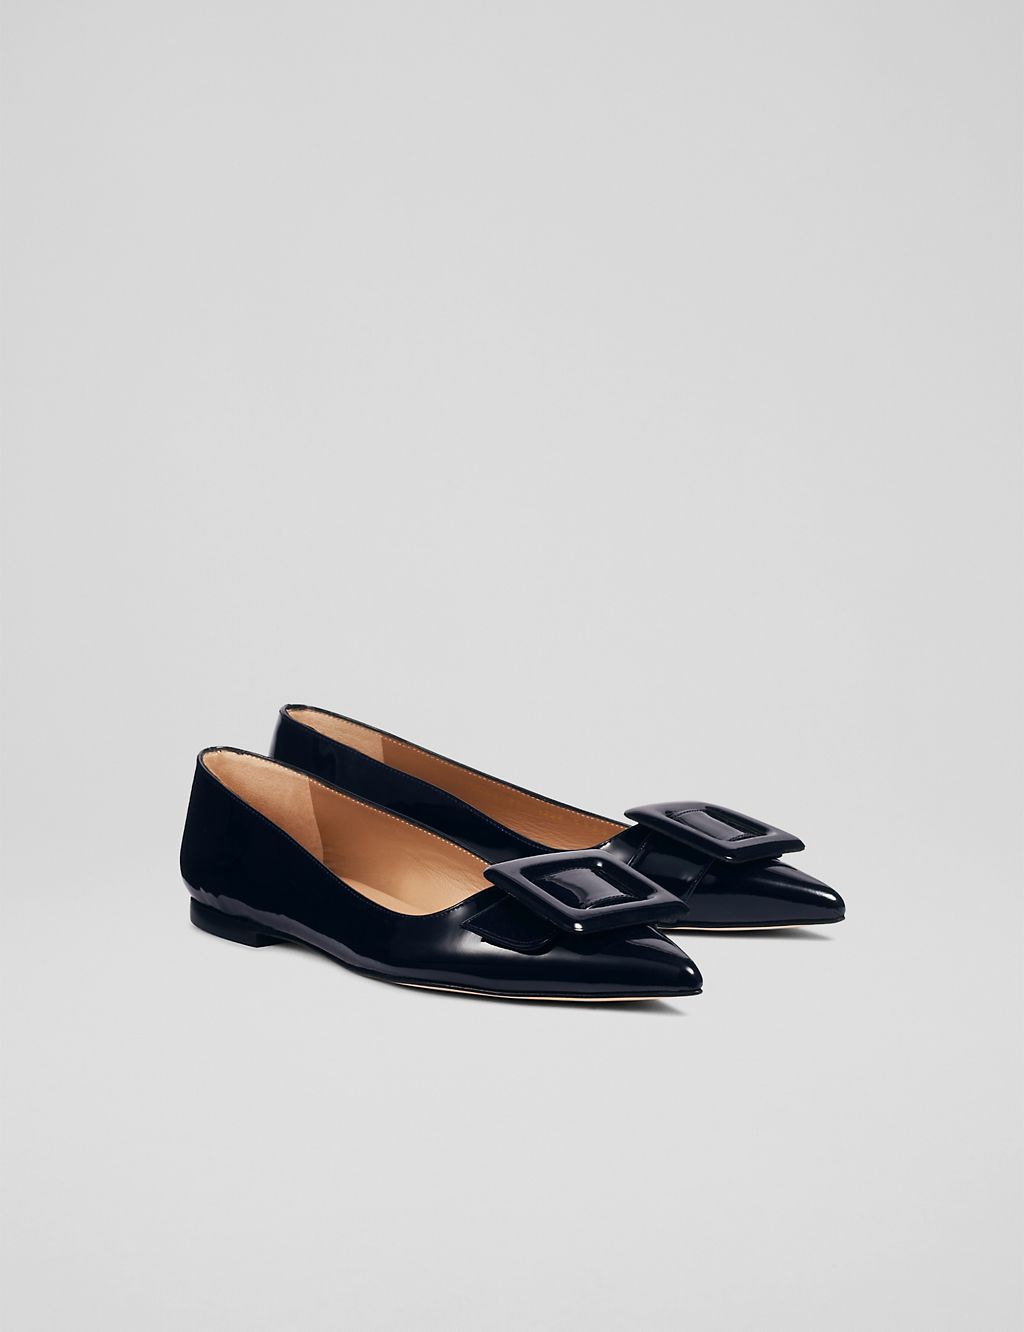 Leather Patent Buckle Flat Pointed Pumps 2 of 3